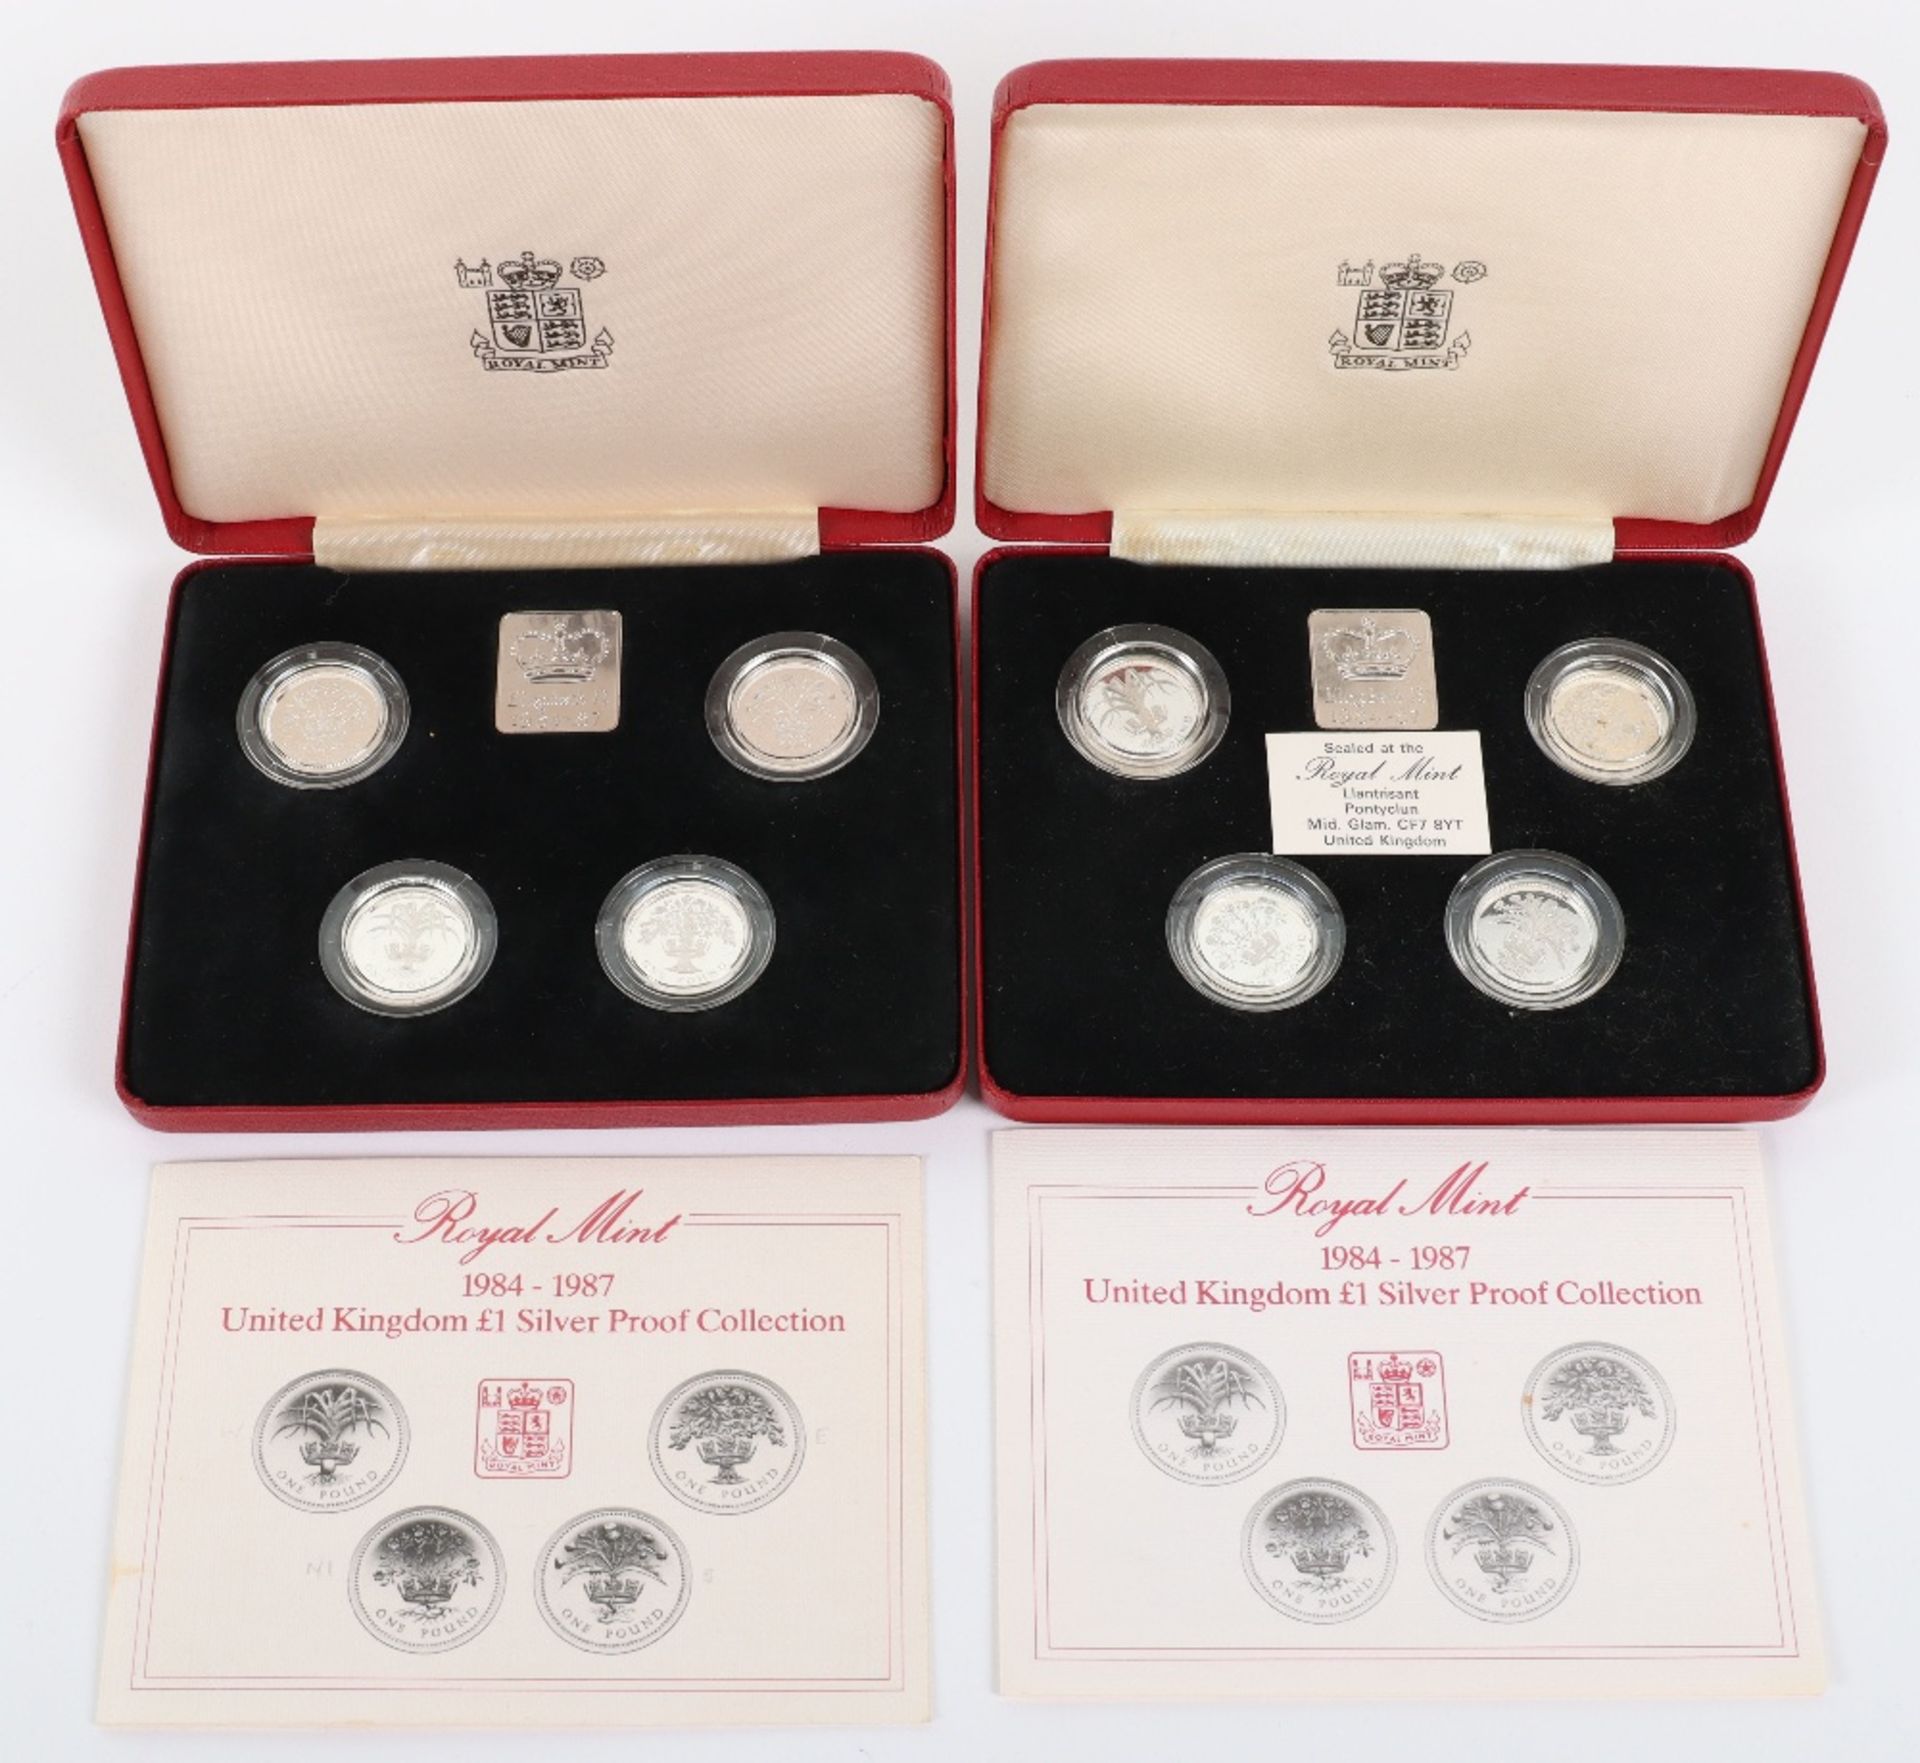 Two 1984-1987 Silver Proof One Pound Collection